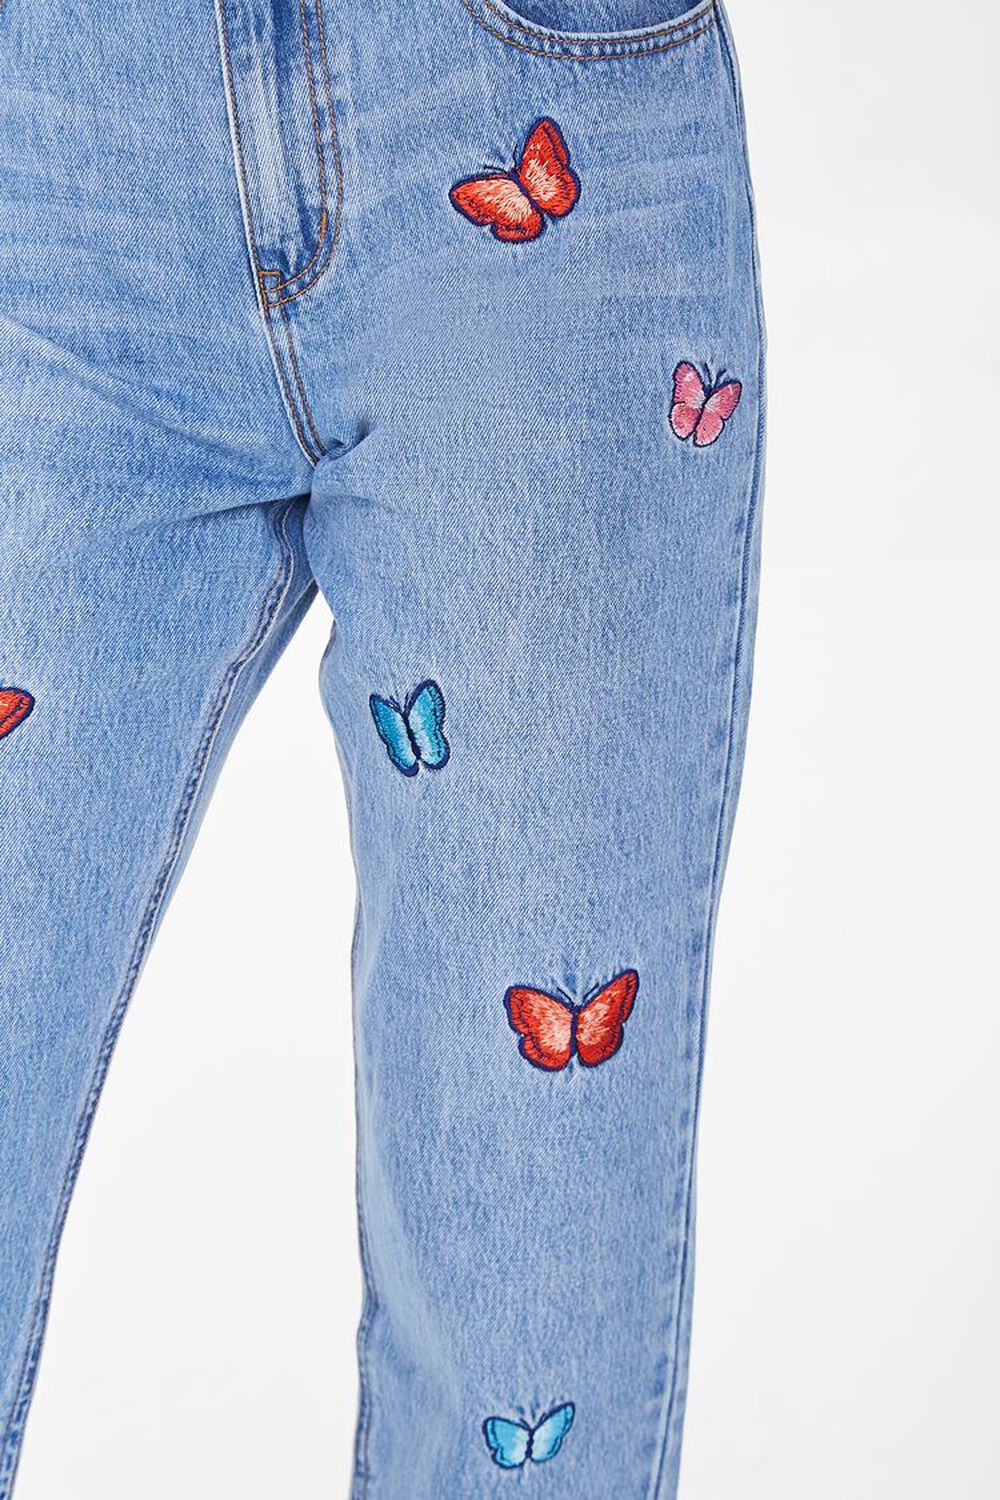 Jeans With Patches